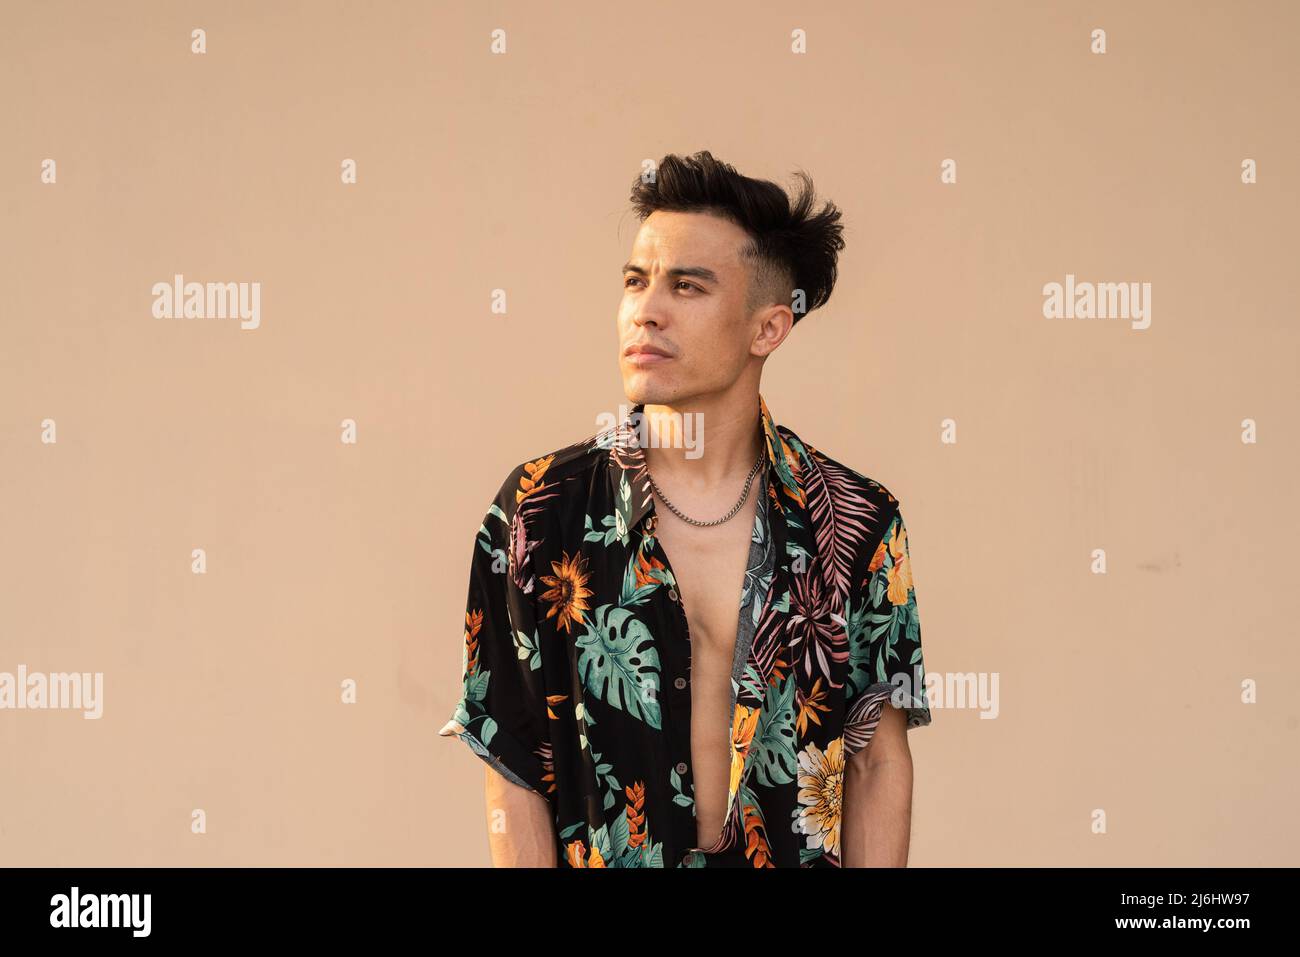 Portrait of handsome young cool stylish man against plain background Stock Photo